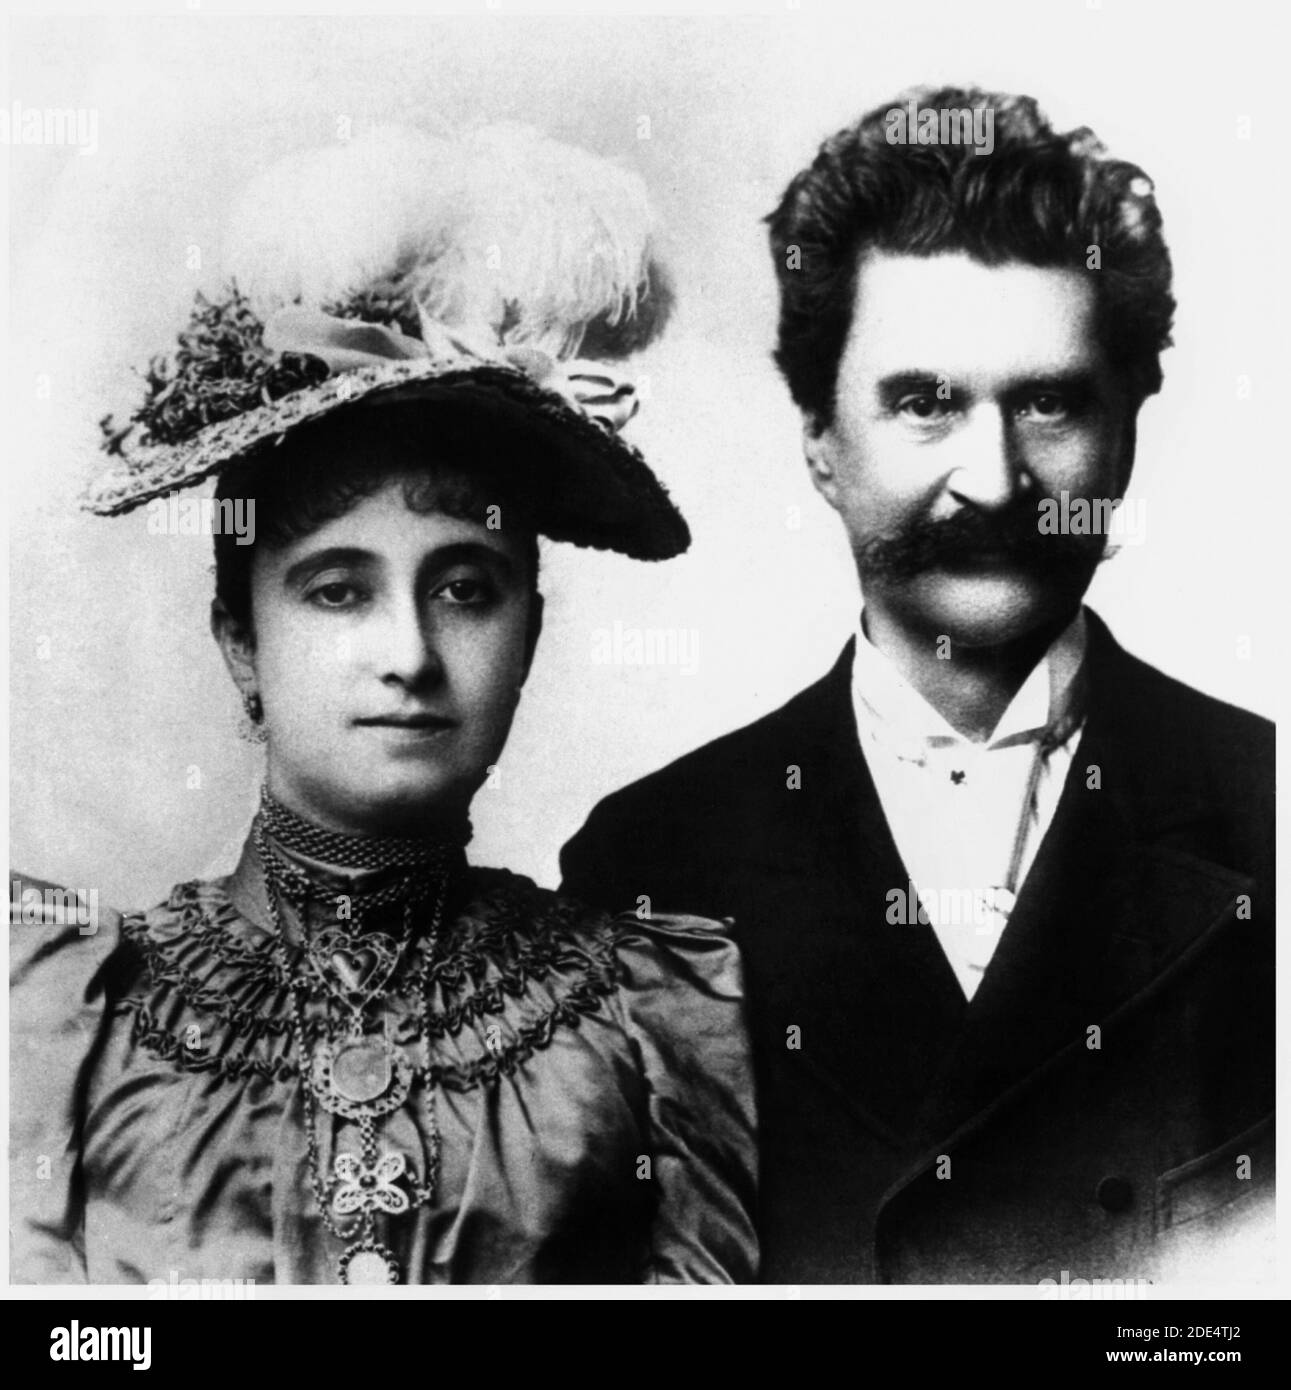 1887 ca, AUSTRIA : The austrian music composer JOHANN STRAUSS Jr ( 1825 - 1899 ) with his 3th wife ADELE DEUTSCH ( 1856 - 1930 ) married in august 1887 . Dubbed ' The Waltz King ', popular composer of dance music and Operettas , of wich the most famous is DIE FLEDERMAUS . Unknown photographer .- ADELE - COMPOSITORE - OPERETTA - WALTZER - VALZER - WALZER - CLASSICA - CLASSICAL - PORTRAIT - RITRATTO - MUSICISTA - MUSICA - moustache - baffi  - CRAVATTA - TIE - Junior  - -- ARCHIVIO GBB Stock Photo